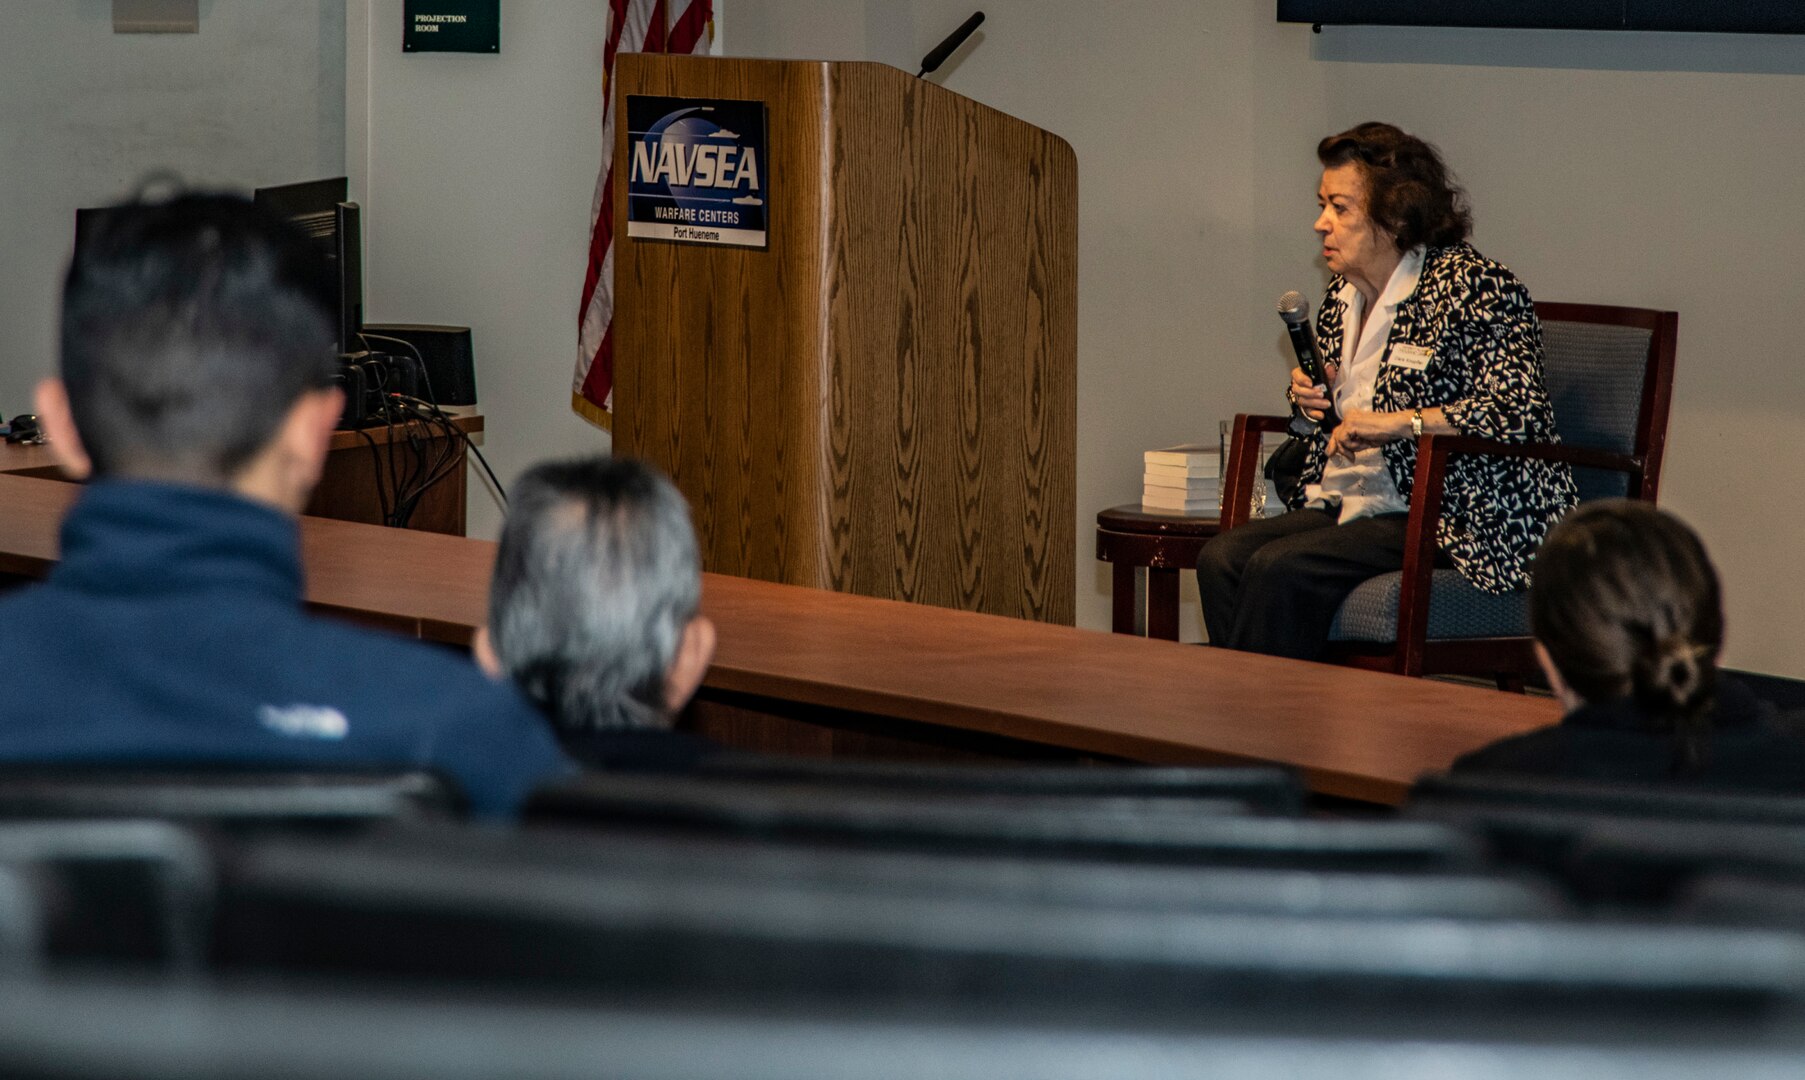 Clara Knopfler tells her story of survival from the Holocaust to personnel assigned to Naval Surface Warfare Center, Port Hueneme Division, as part of the command’s Holocaust Remembrance event, April 23.